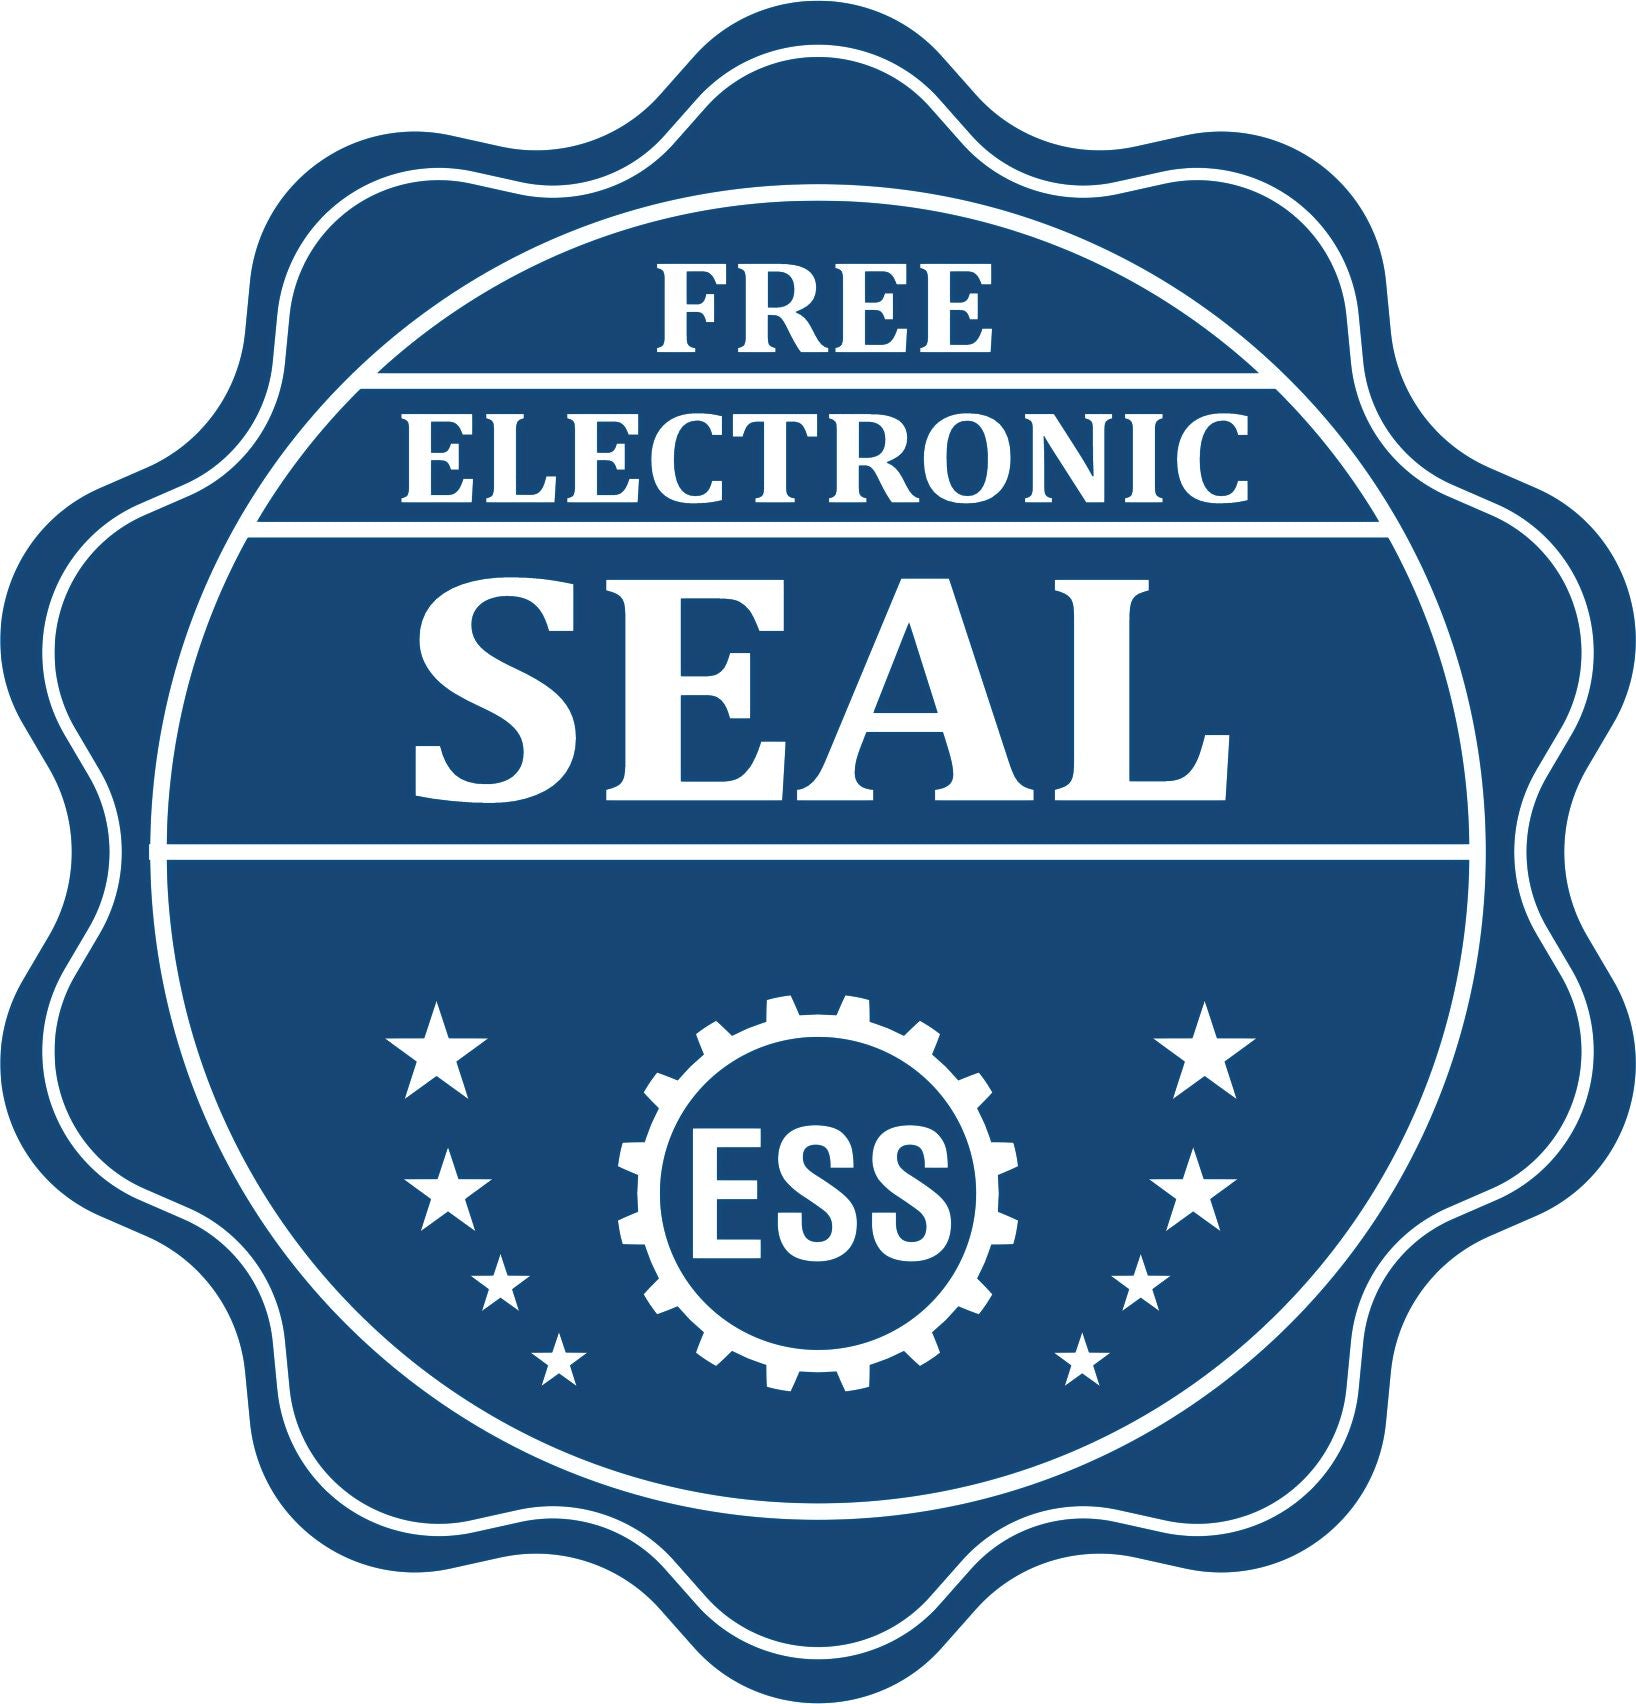 A badge showing a free electronic seal for the State of Oregon Extended Long Reach Engineer Seal with stars and the ESS gear on the emblem.